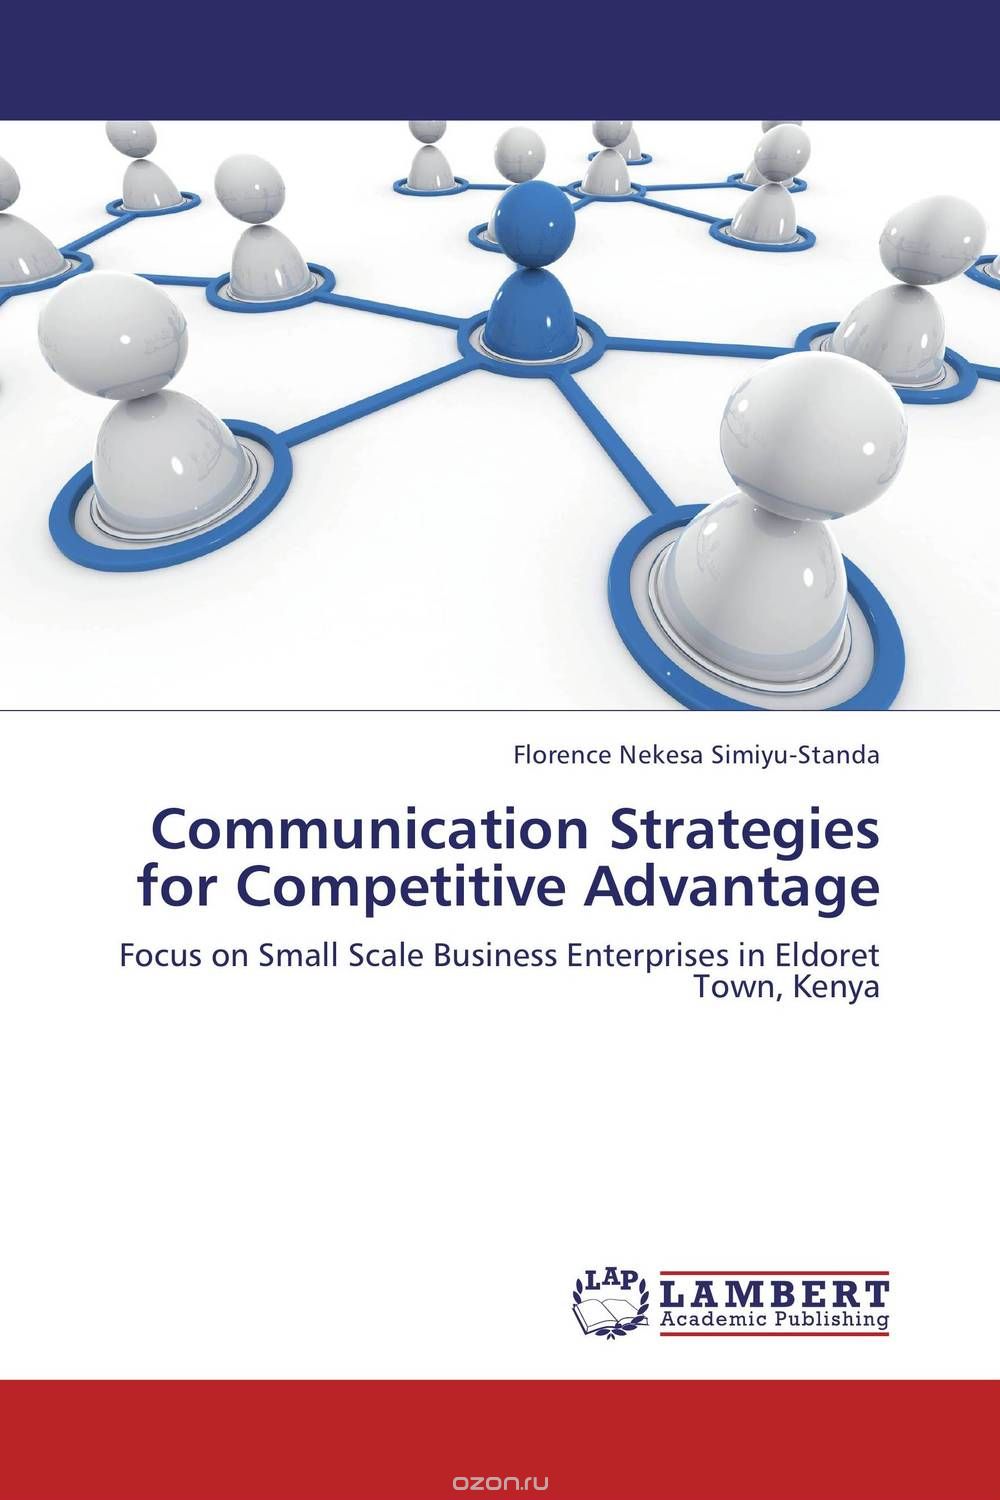 Communication Strategies for Competitive Advantage